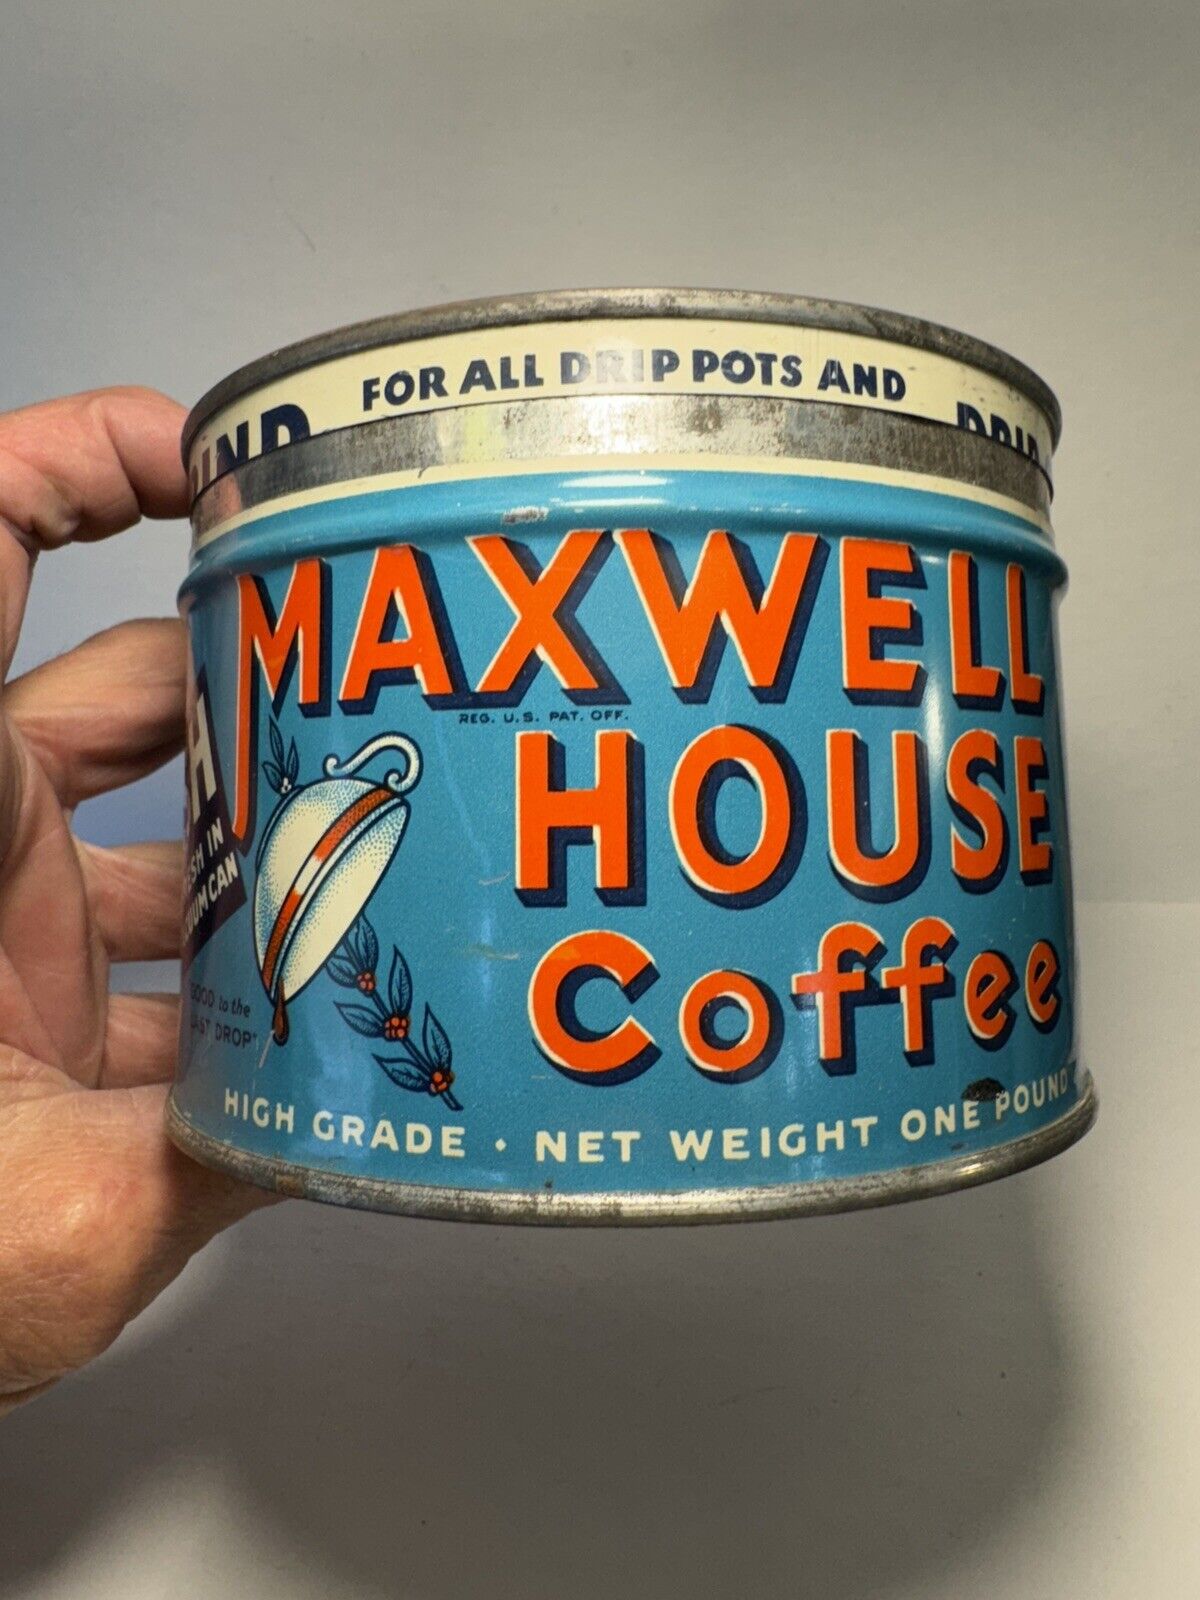 MAXWELL HOUSE COFFEE / Tin Advertising Can - 1 LB